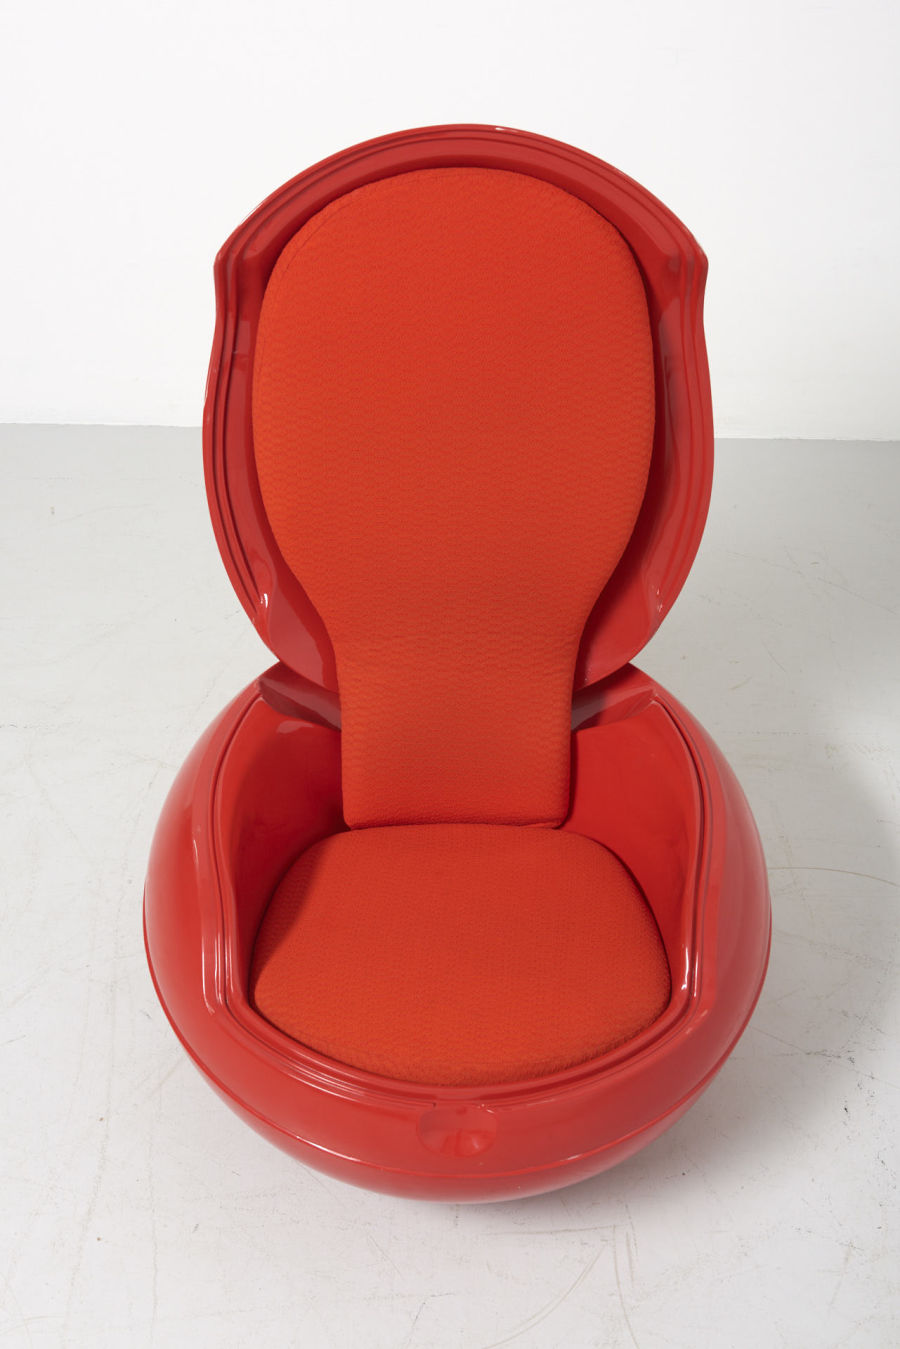 modestfurniture-vintage-2723-peter-ghyczy-garden-egg-chair-red03